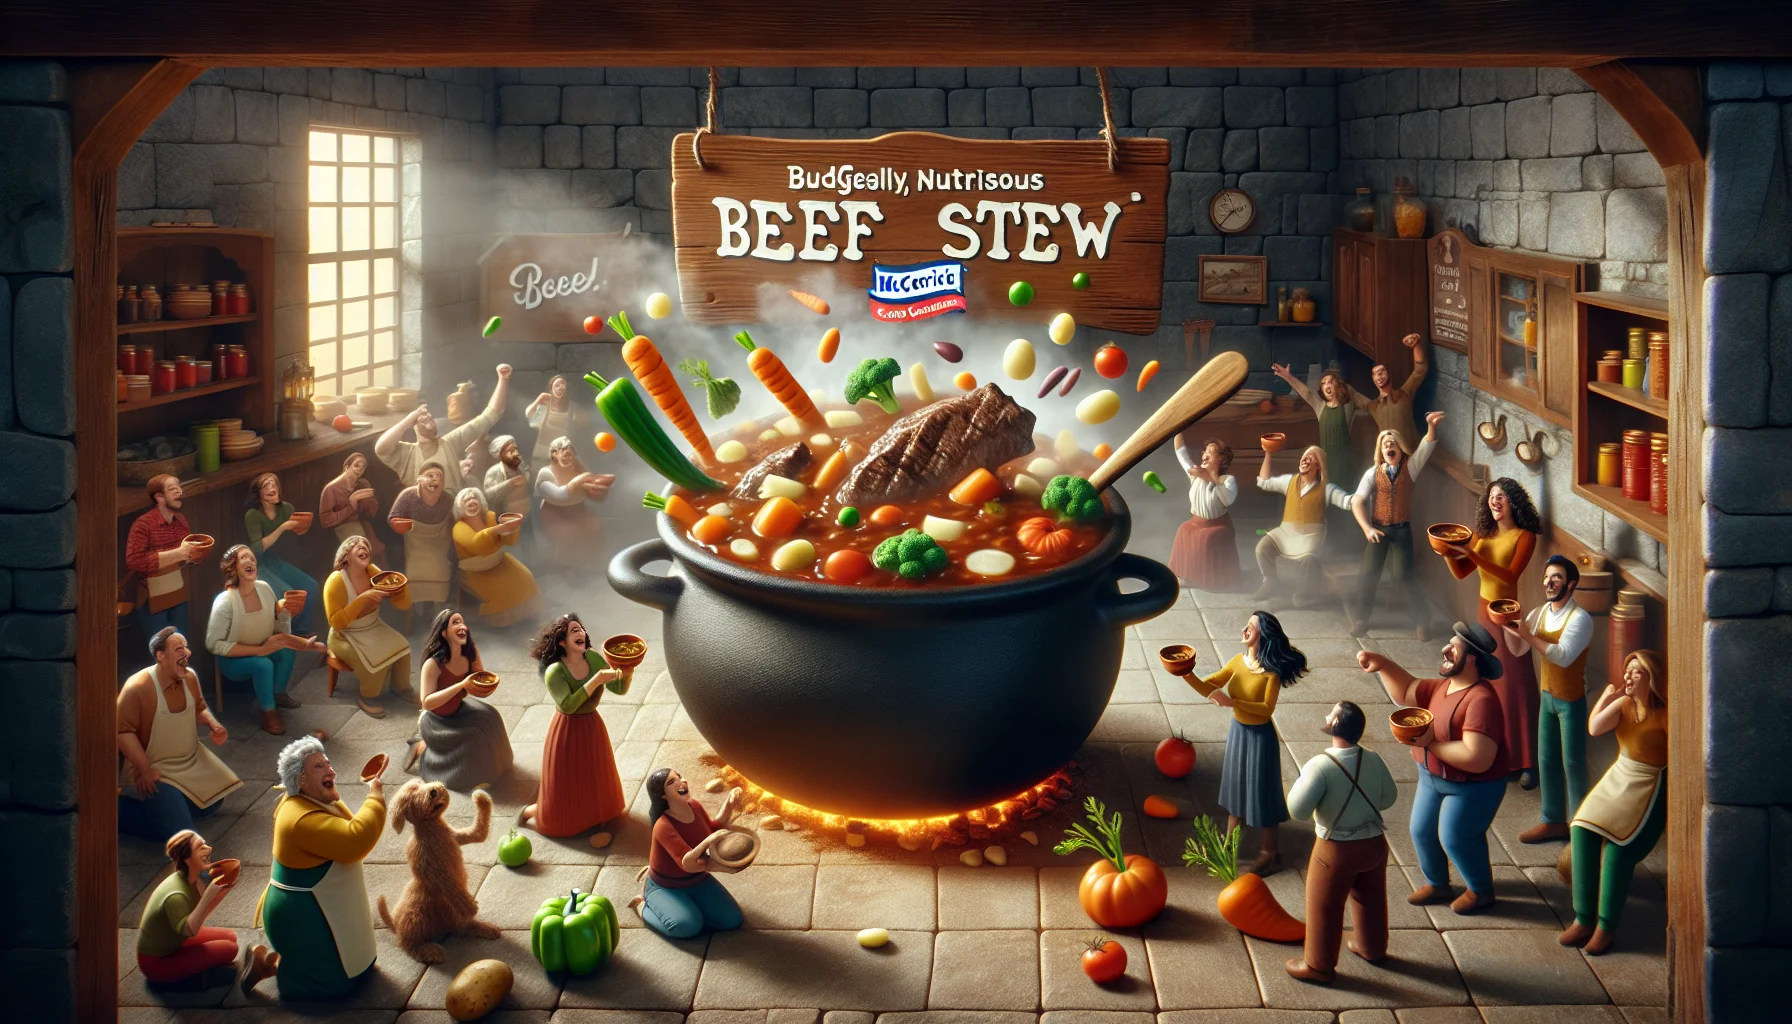 Create an engaging and humorous scene featuring a budget-friendly, nutritious beef stew from McCormick. The visual should draw the viewer's eye to a rustic kitchen, where a jovially animated earthenware pot is bubbling over with a hearty beef stew. A lively assortment of vegetables, such as vibrant carrots, earthy potatoes, and juicy tomatoes, can be seen dancing around the pot in a playful manner. Various people of different genders and descents are drawn towards the delicious scent, their faces filled with anticipation as they hold their bowls out, ready to savour the hearty stew.